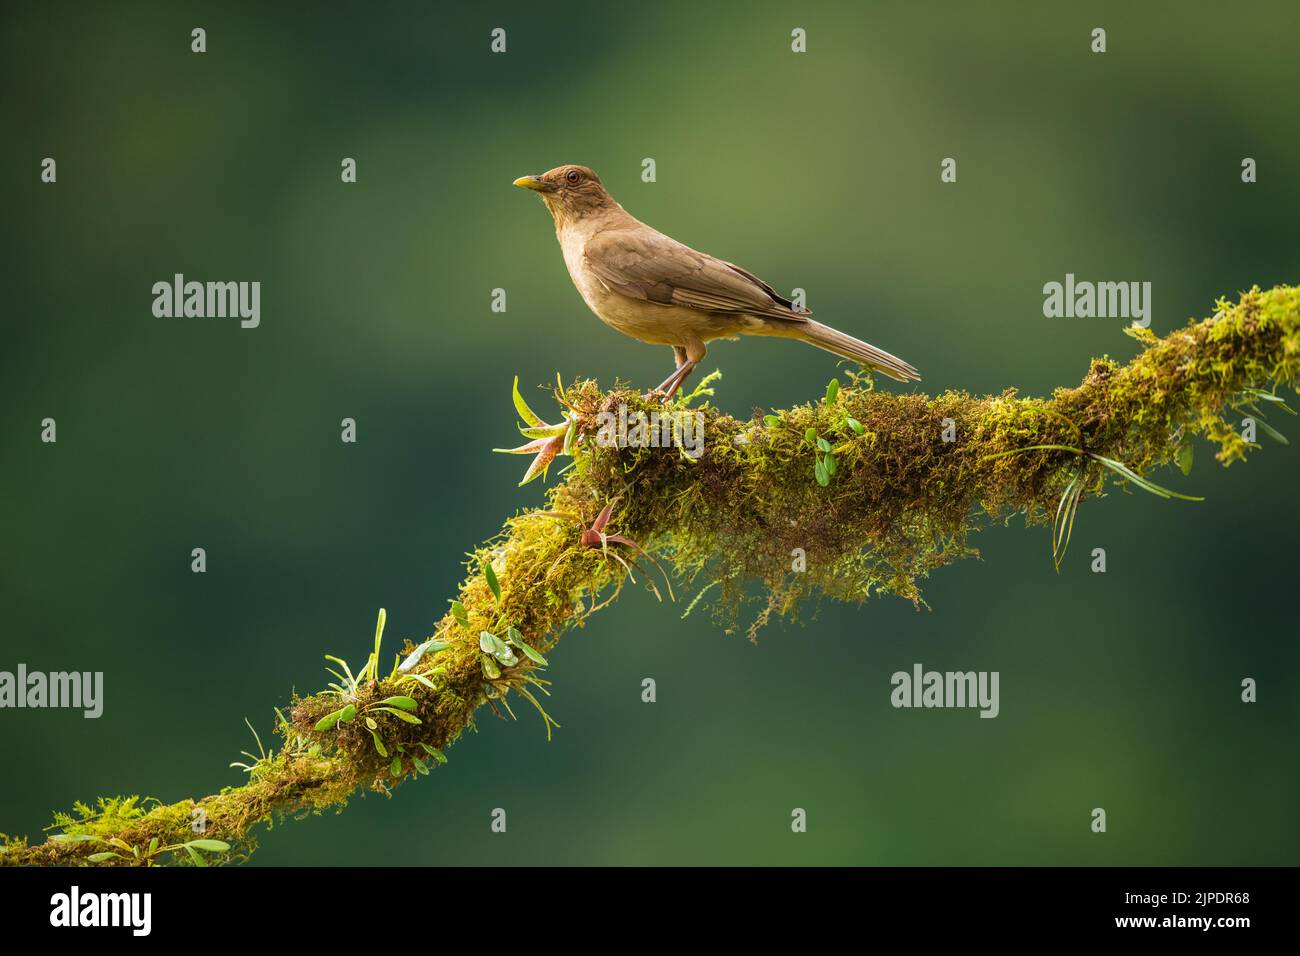 A clay coloured thrush perched on a branch , Costa Rica Stock Photo